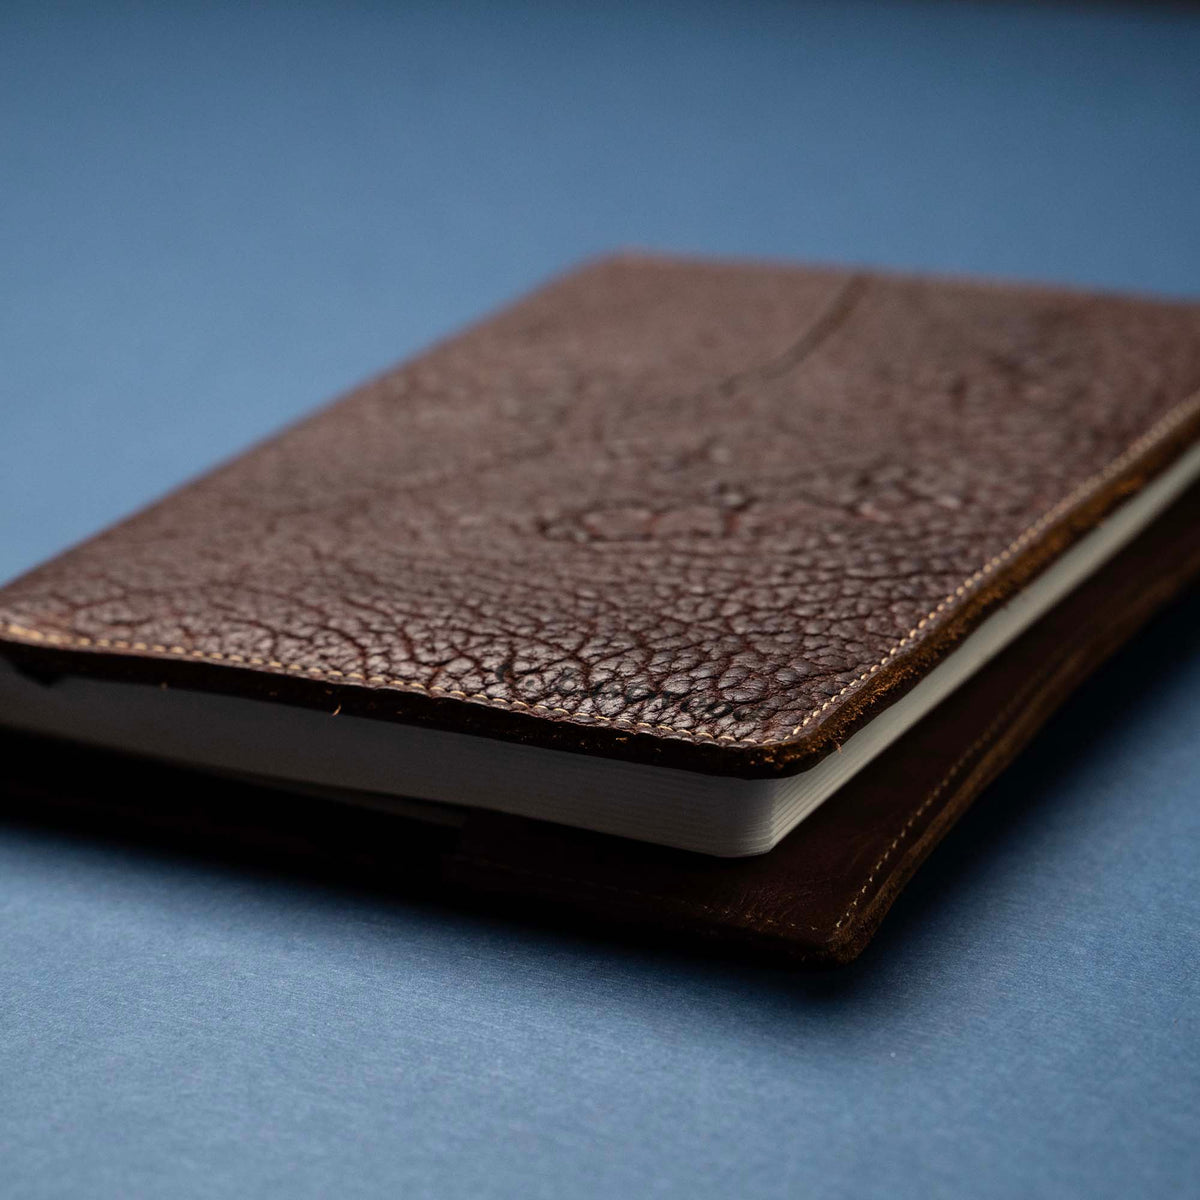 Personalized Leather Journal with Shrunken Bison Leather Cover - The Scholar